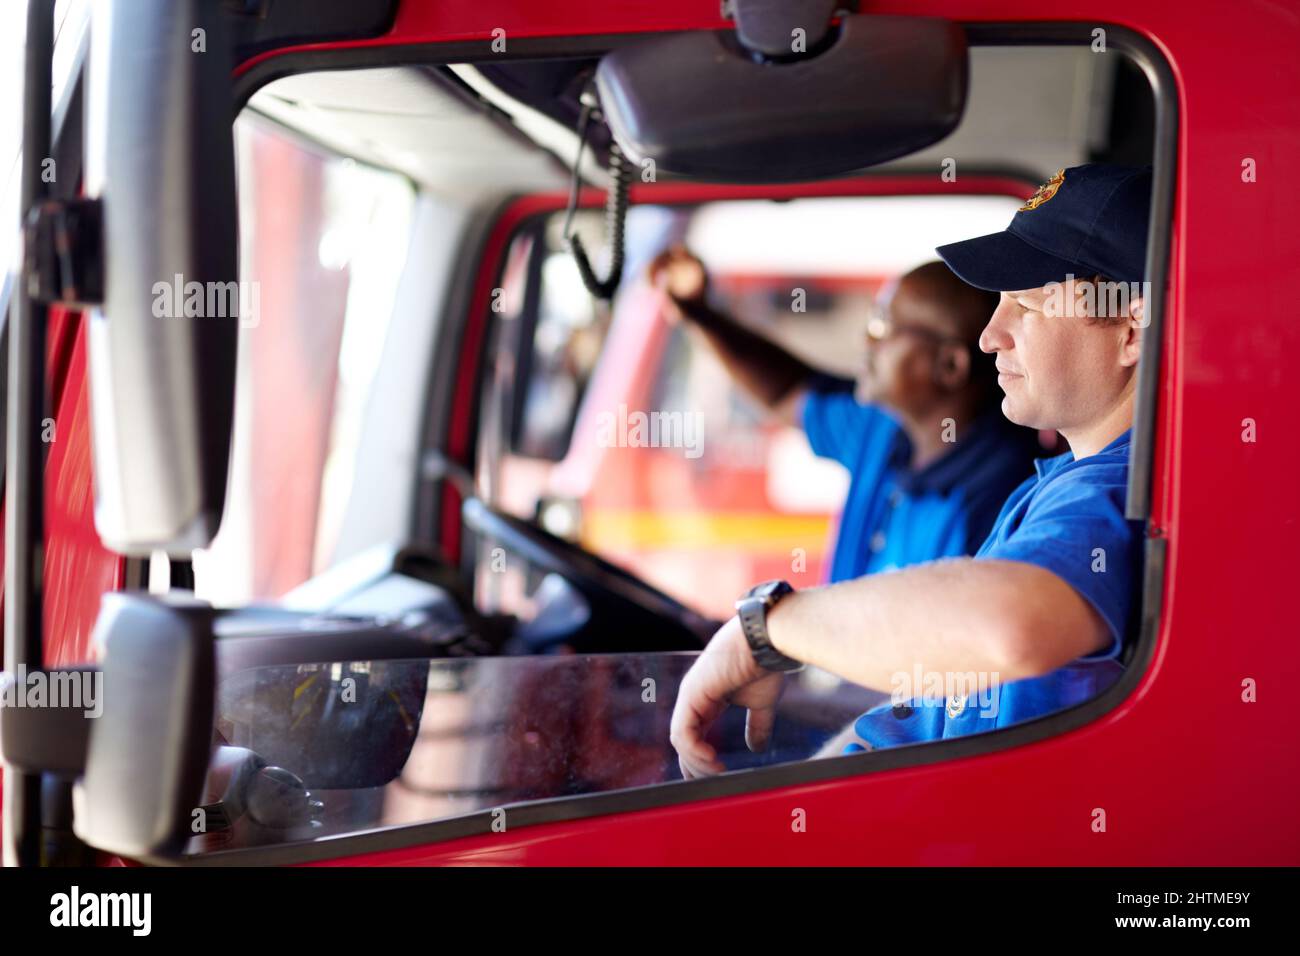 Waiting on the next call. Shot of firemen sitting in a truck. Stock Photo